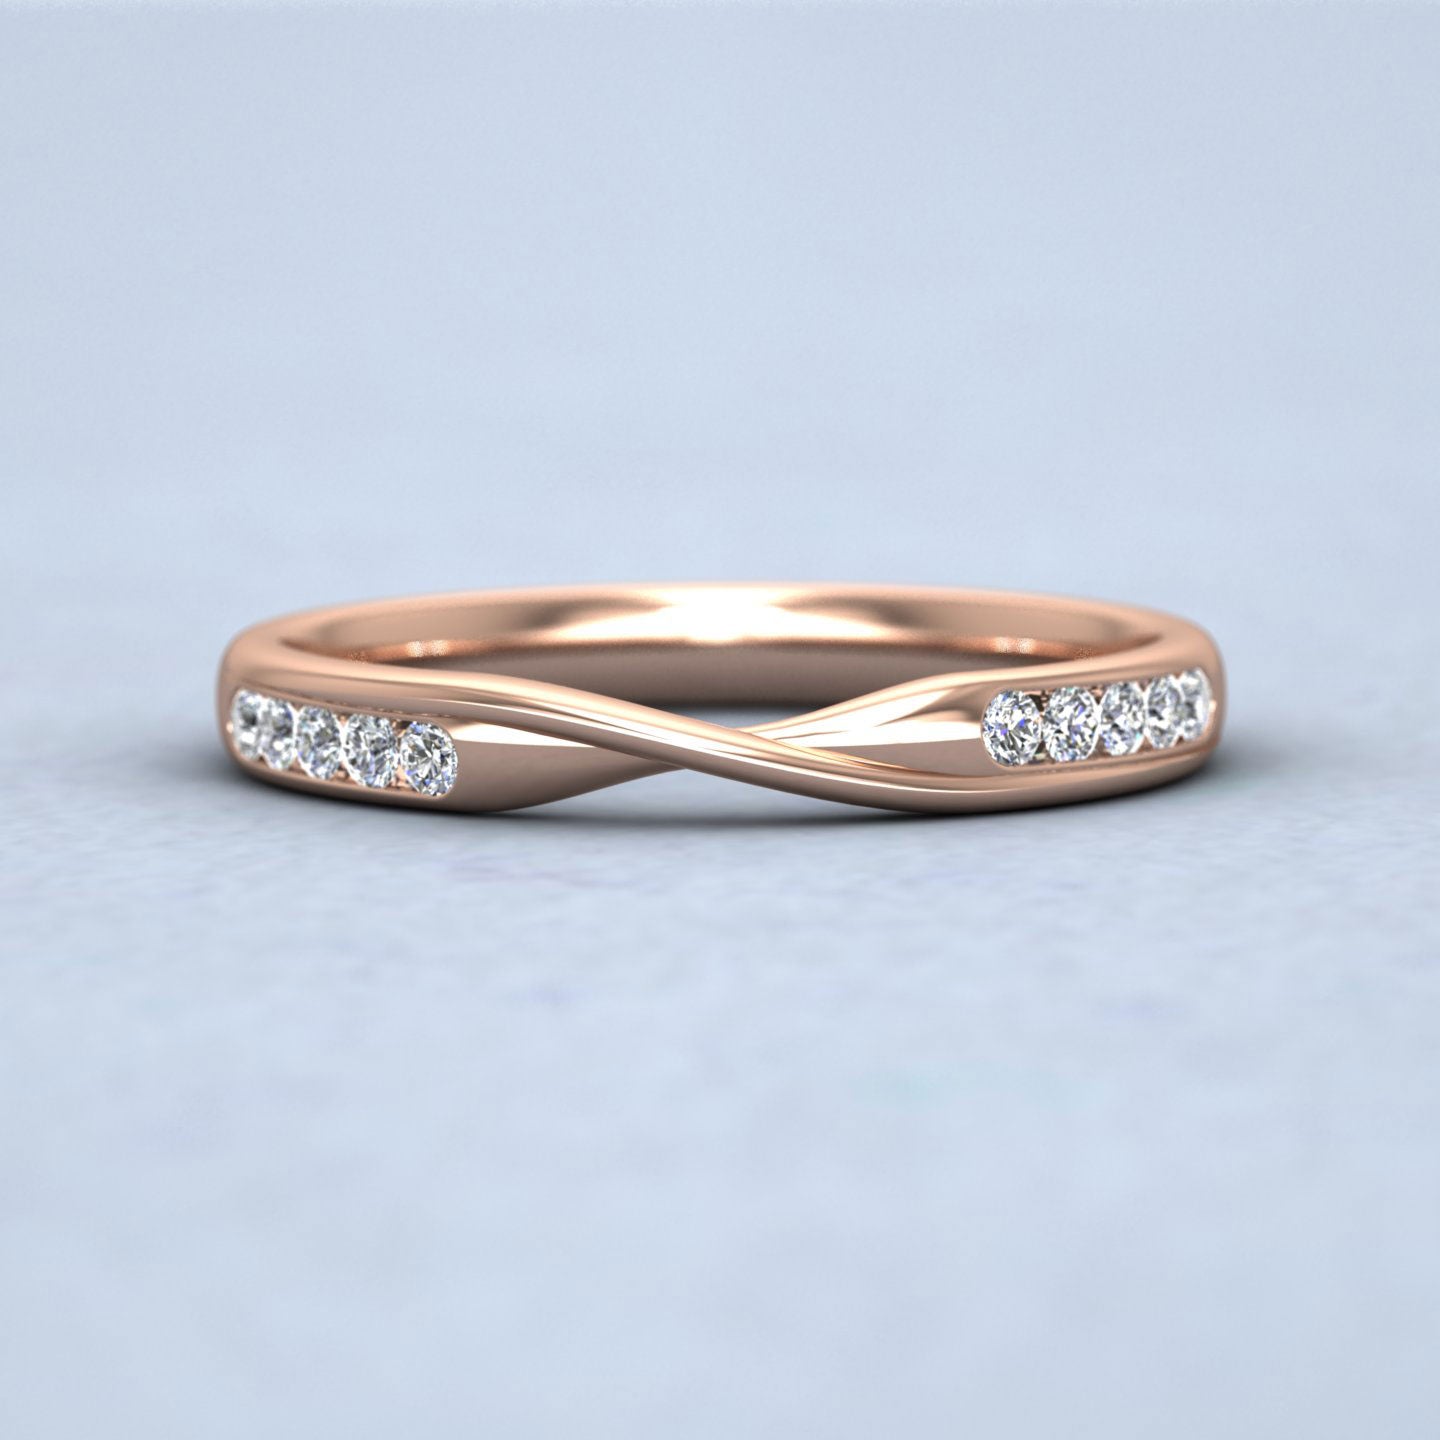 Crossover Pattern Wedding Ring In 9ct Rose Gold 2.5mm Wide With Eight Diamonds